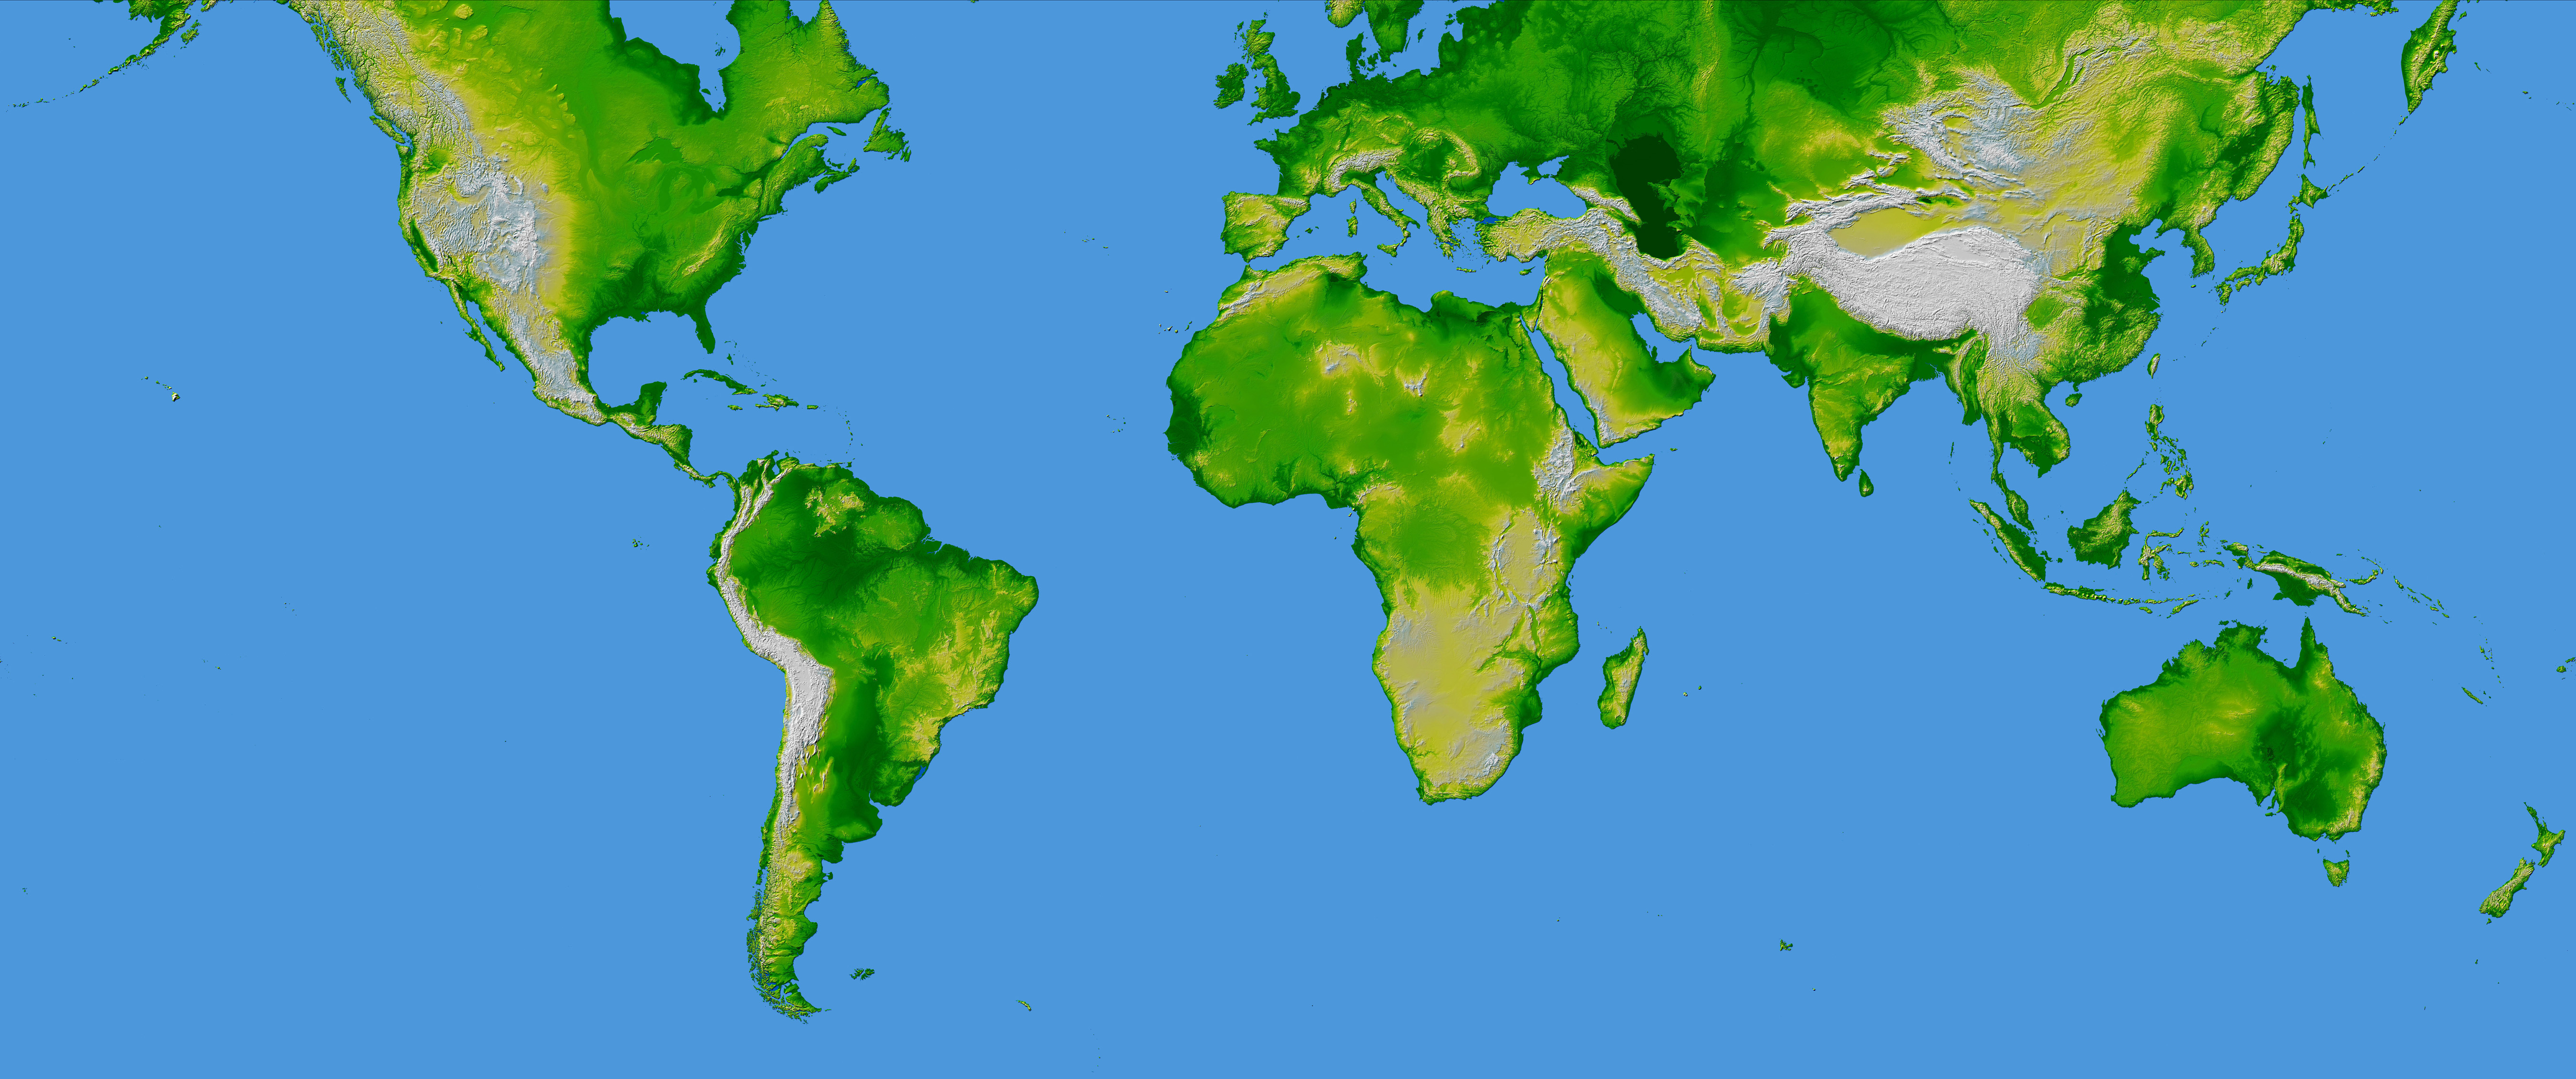 world map topographical